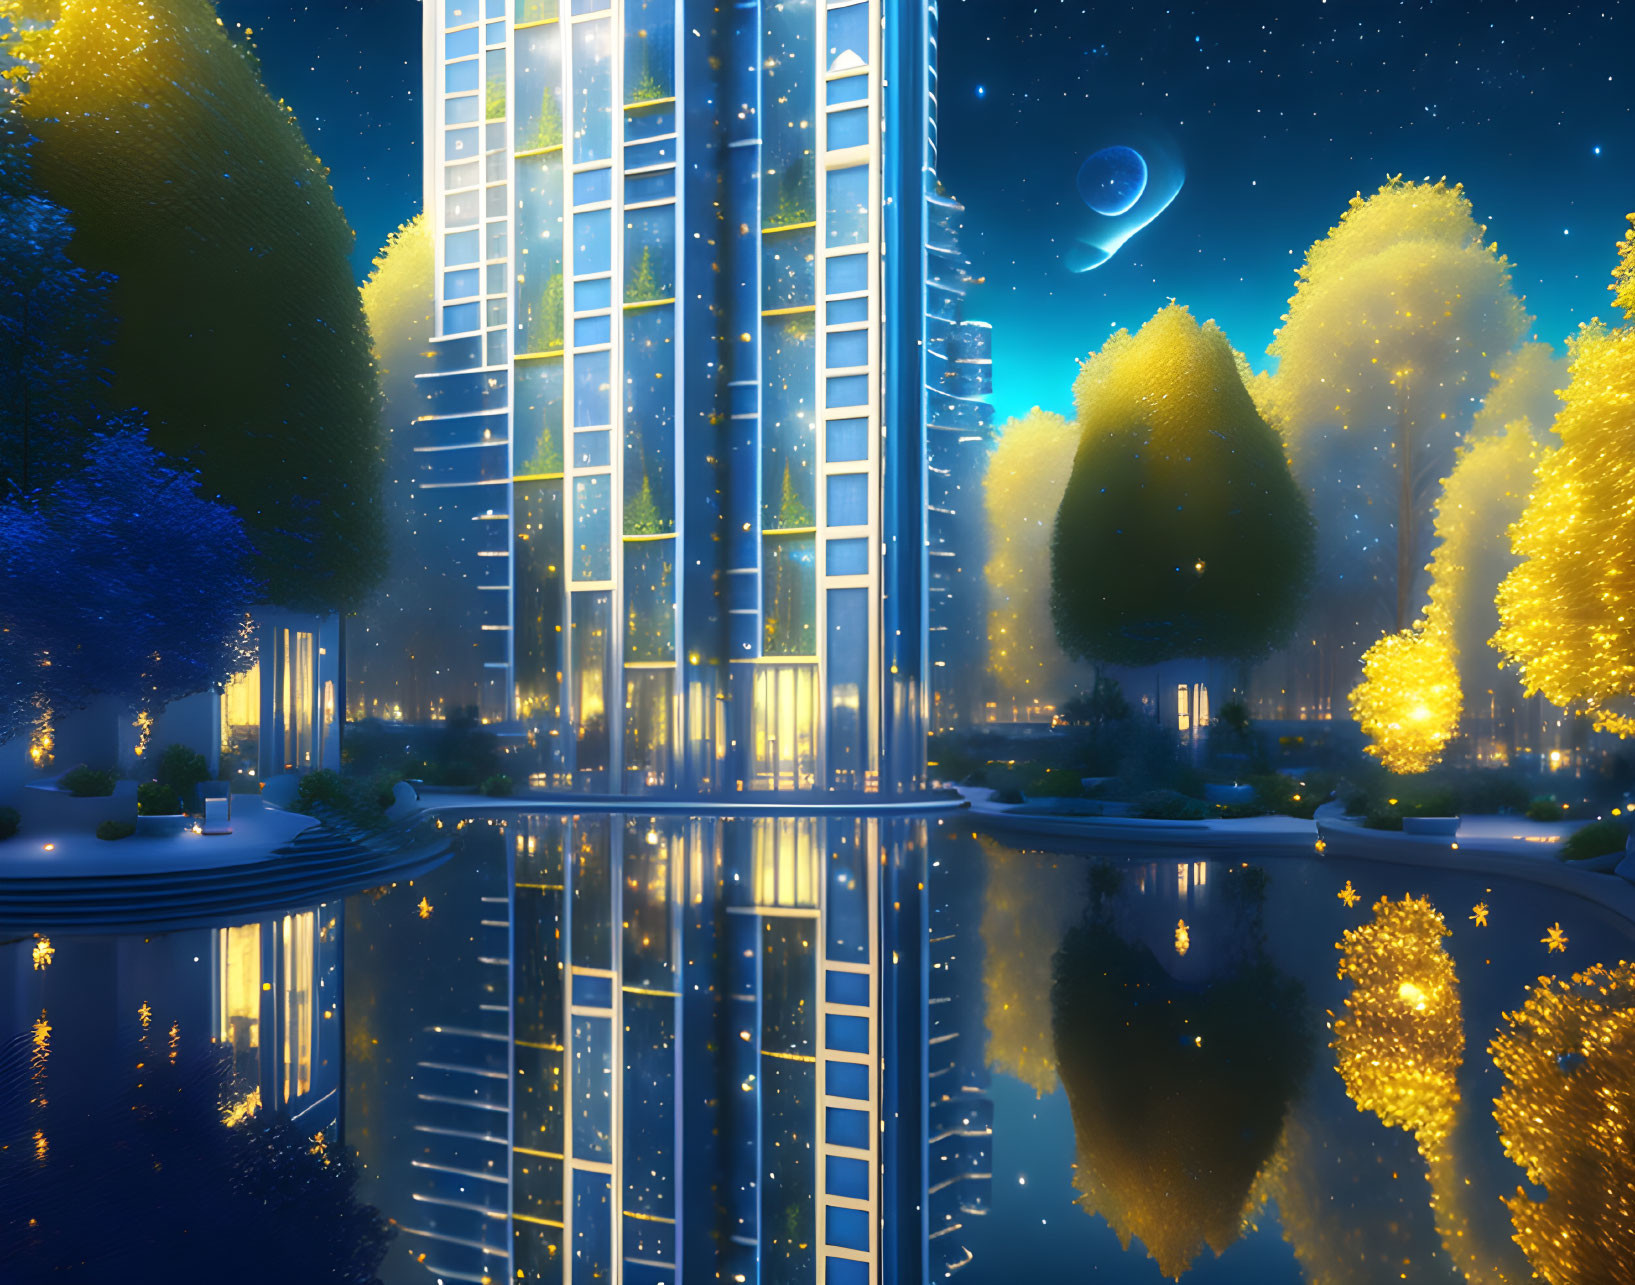 Futuristic building with glowing trees at night